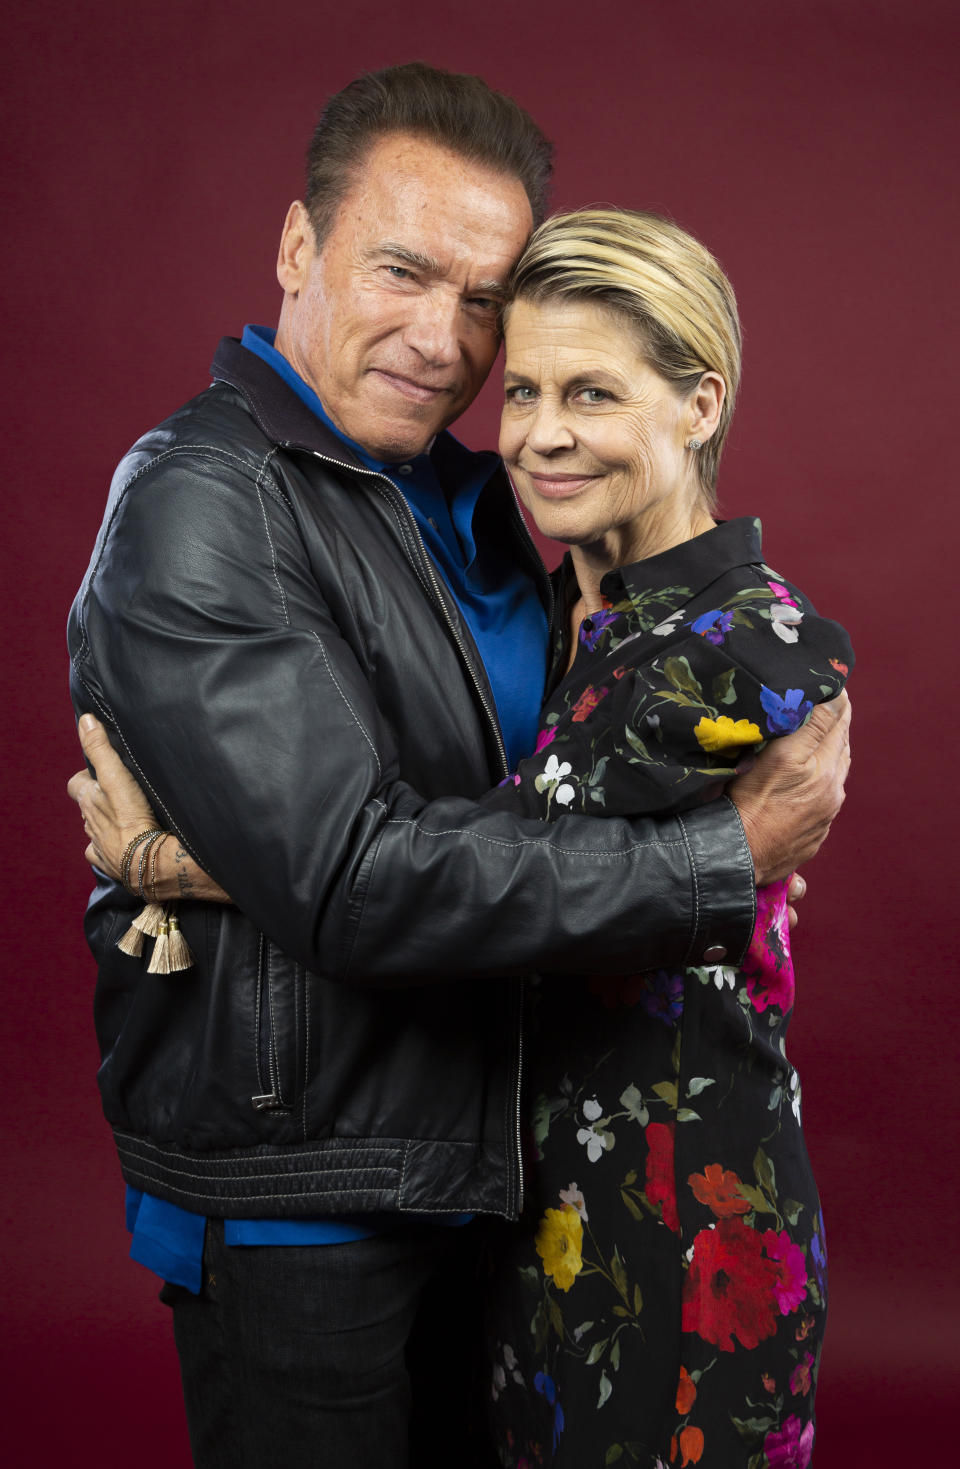 This Oct. 26, 2019 photo shows actor Arnold Schwarzenegger, left, and actress Linda Hamilton posing for a portrait to promote the film, "Terminator: Dark Fate" at the Four Seasons Hotel Los Angeles at Beverly Hills in Los Angeles. (Photo by Willy Sanjuan/Invision/AP)